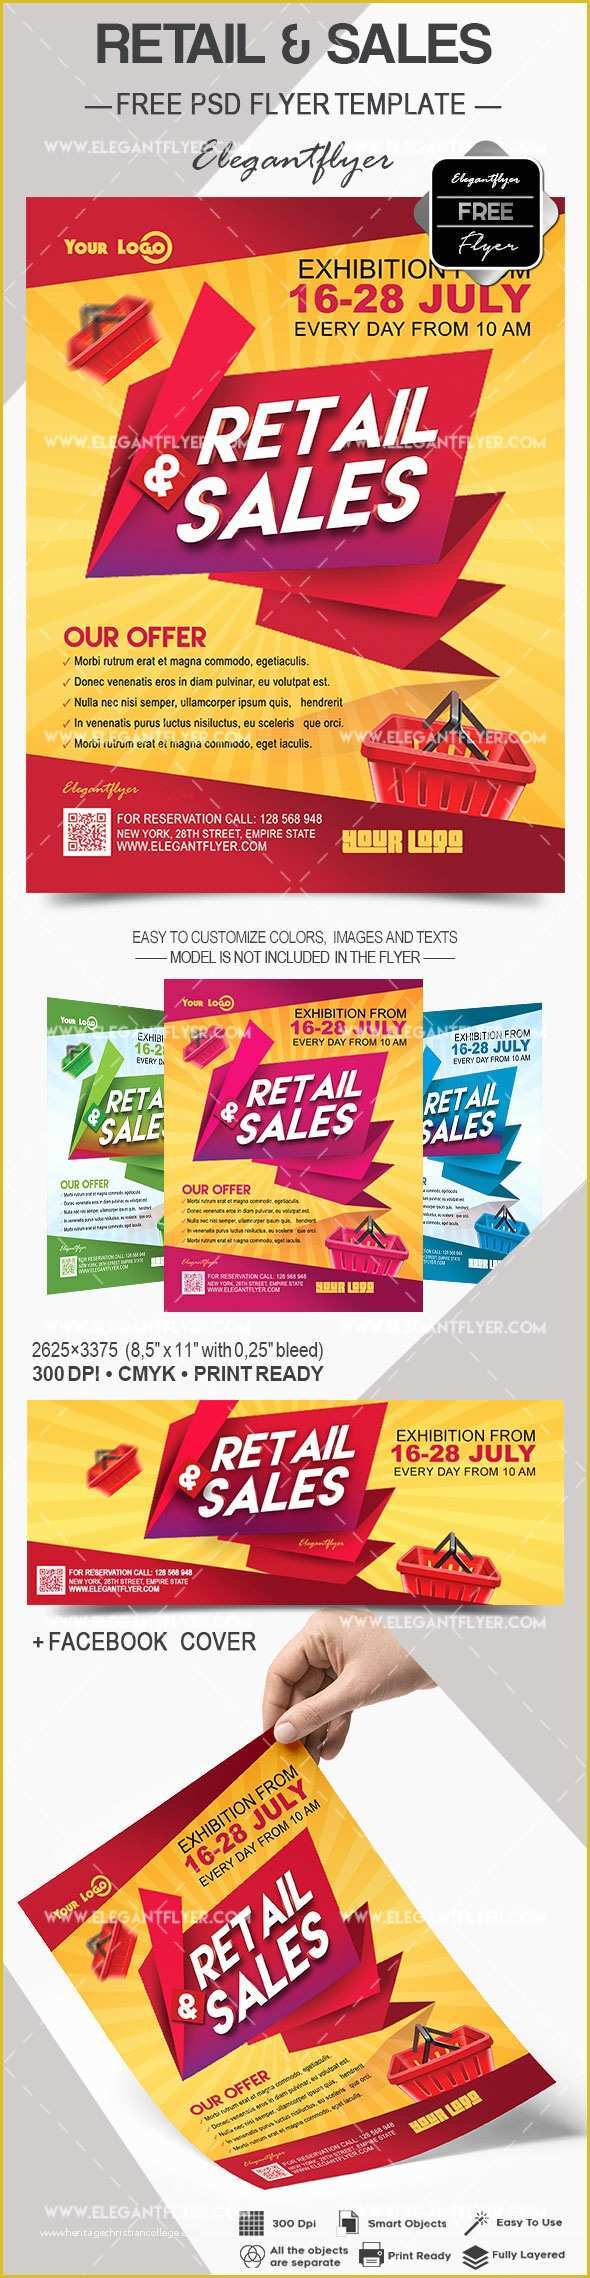 Sales Flyer Templates Free Download Of Download Retail & Sales Cover Shop Flyer